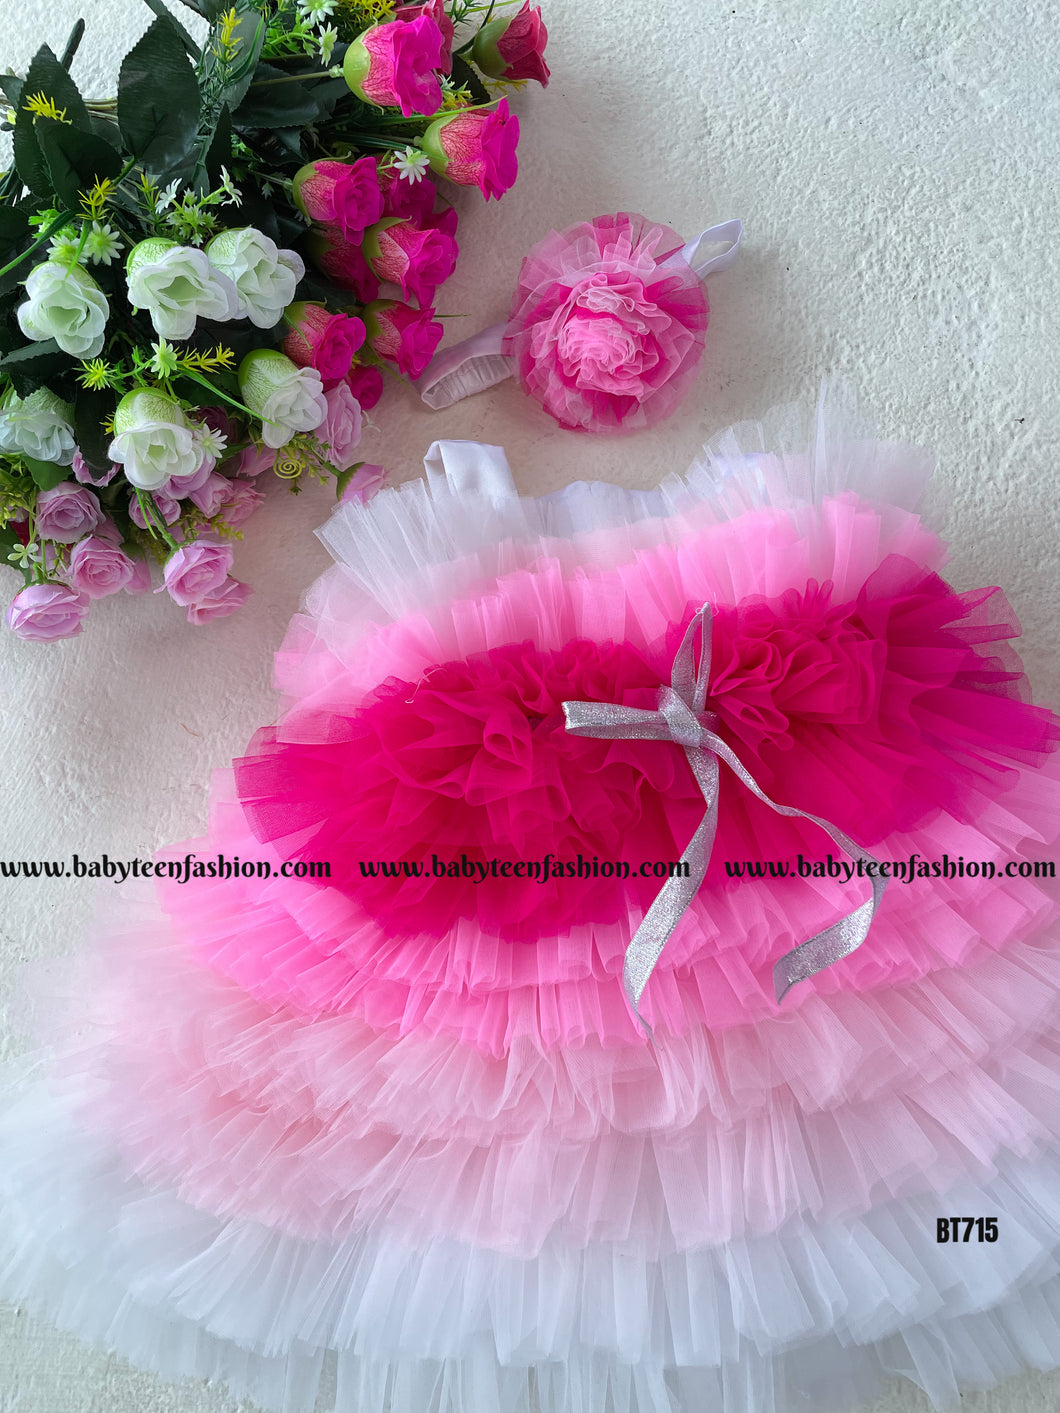 BT715 Multilayered Birthday Frock Done in Shades of Pink with Silver Ribbon Highlight